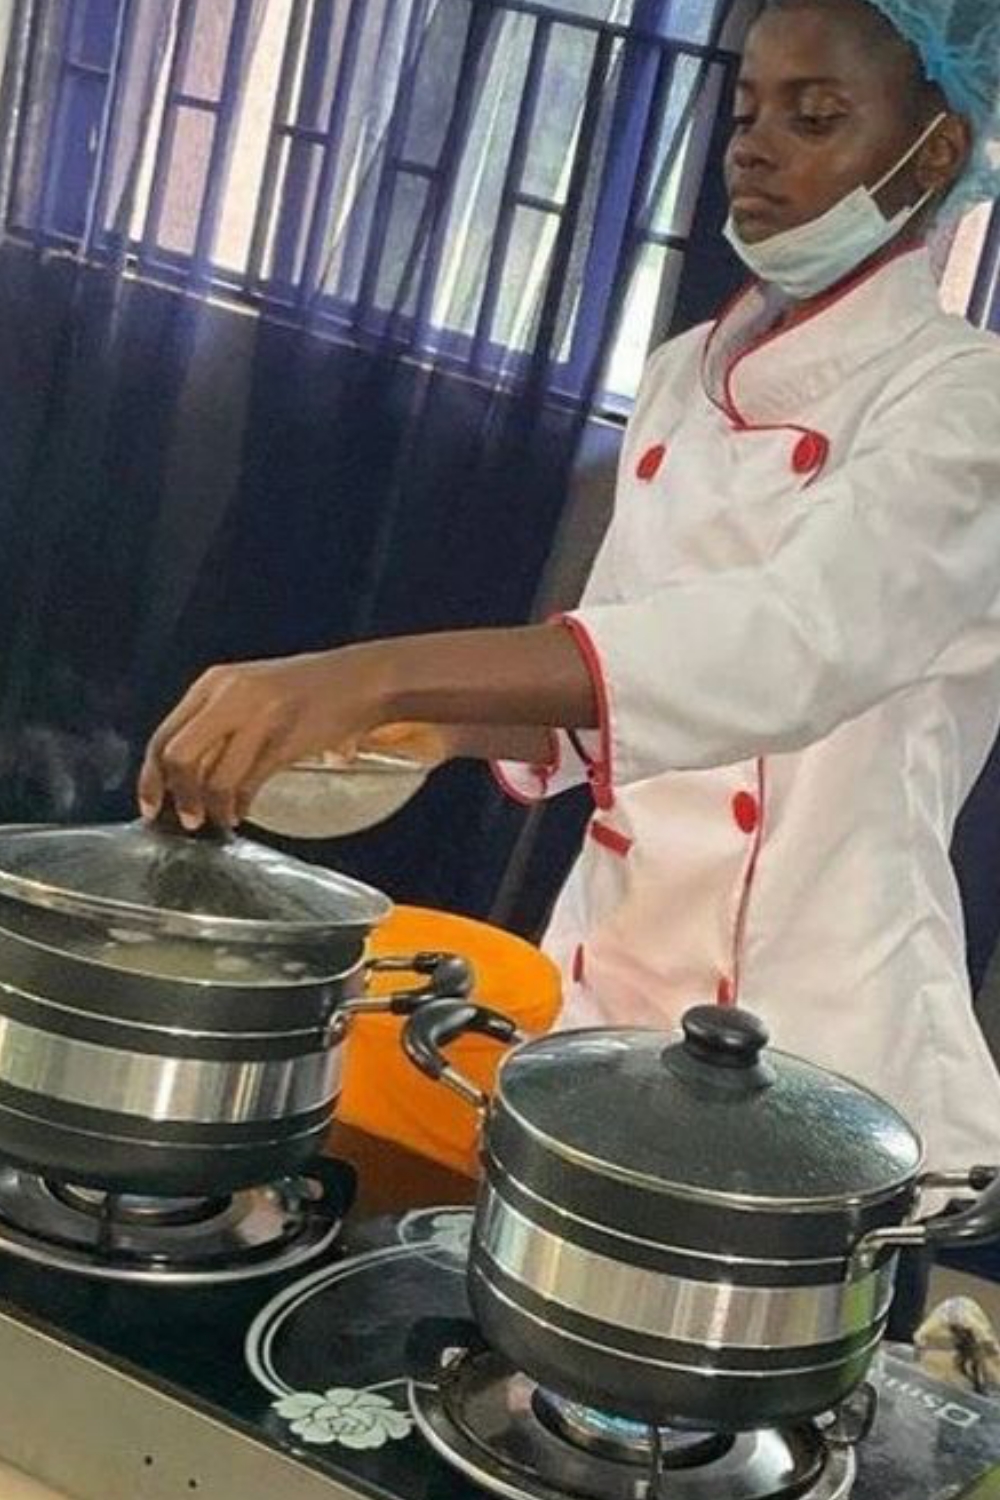 "6hours to go" - Chef Dammy returns from break to break Hilda Baci's cooking record, surrounded by multiple bouncers (Video)